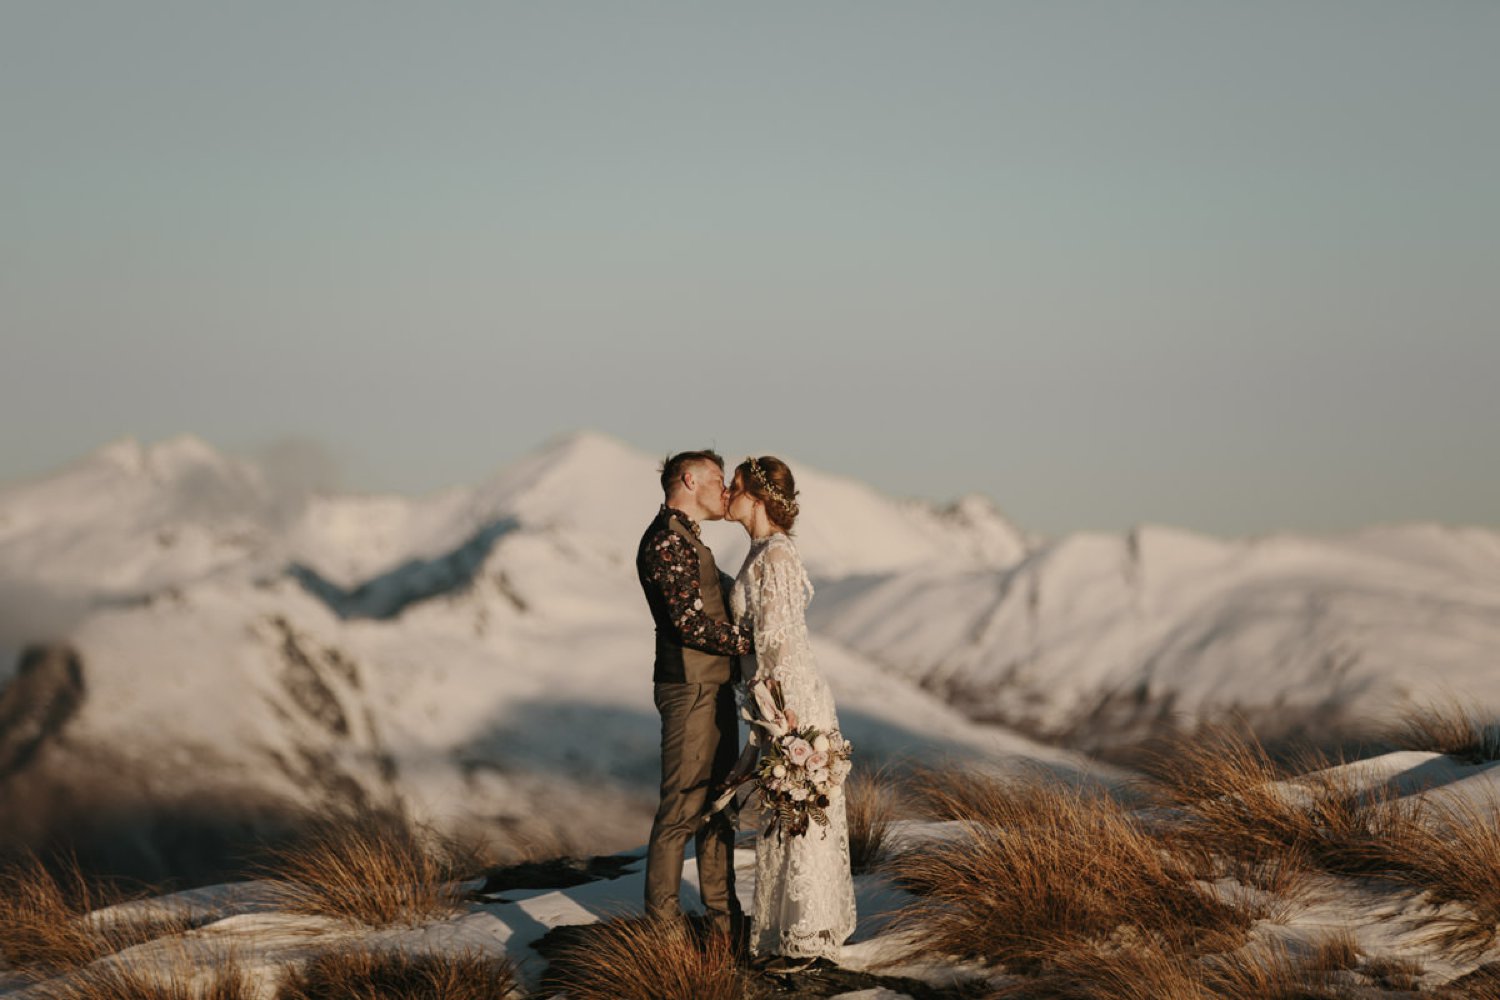 Bride and Groom kissing in the snow at their Cecil Peak Winter Helicopter Elopement by The Lovers Elopement Co